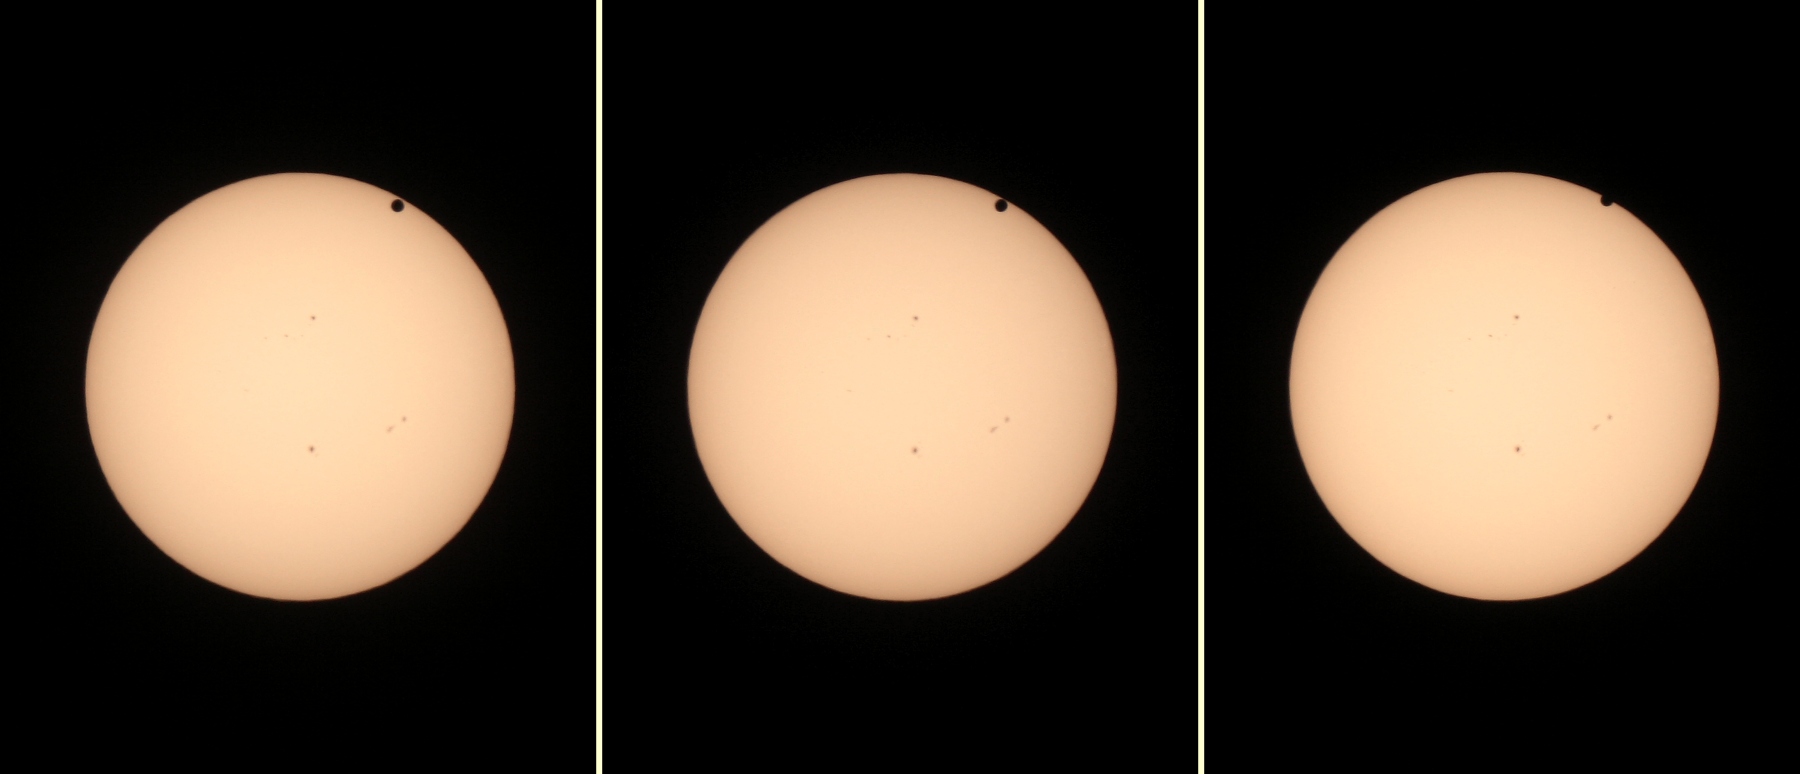 Venus transit in front of the sun